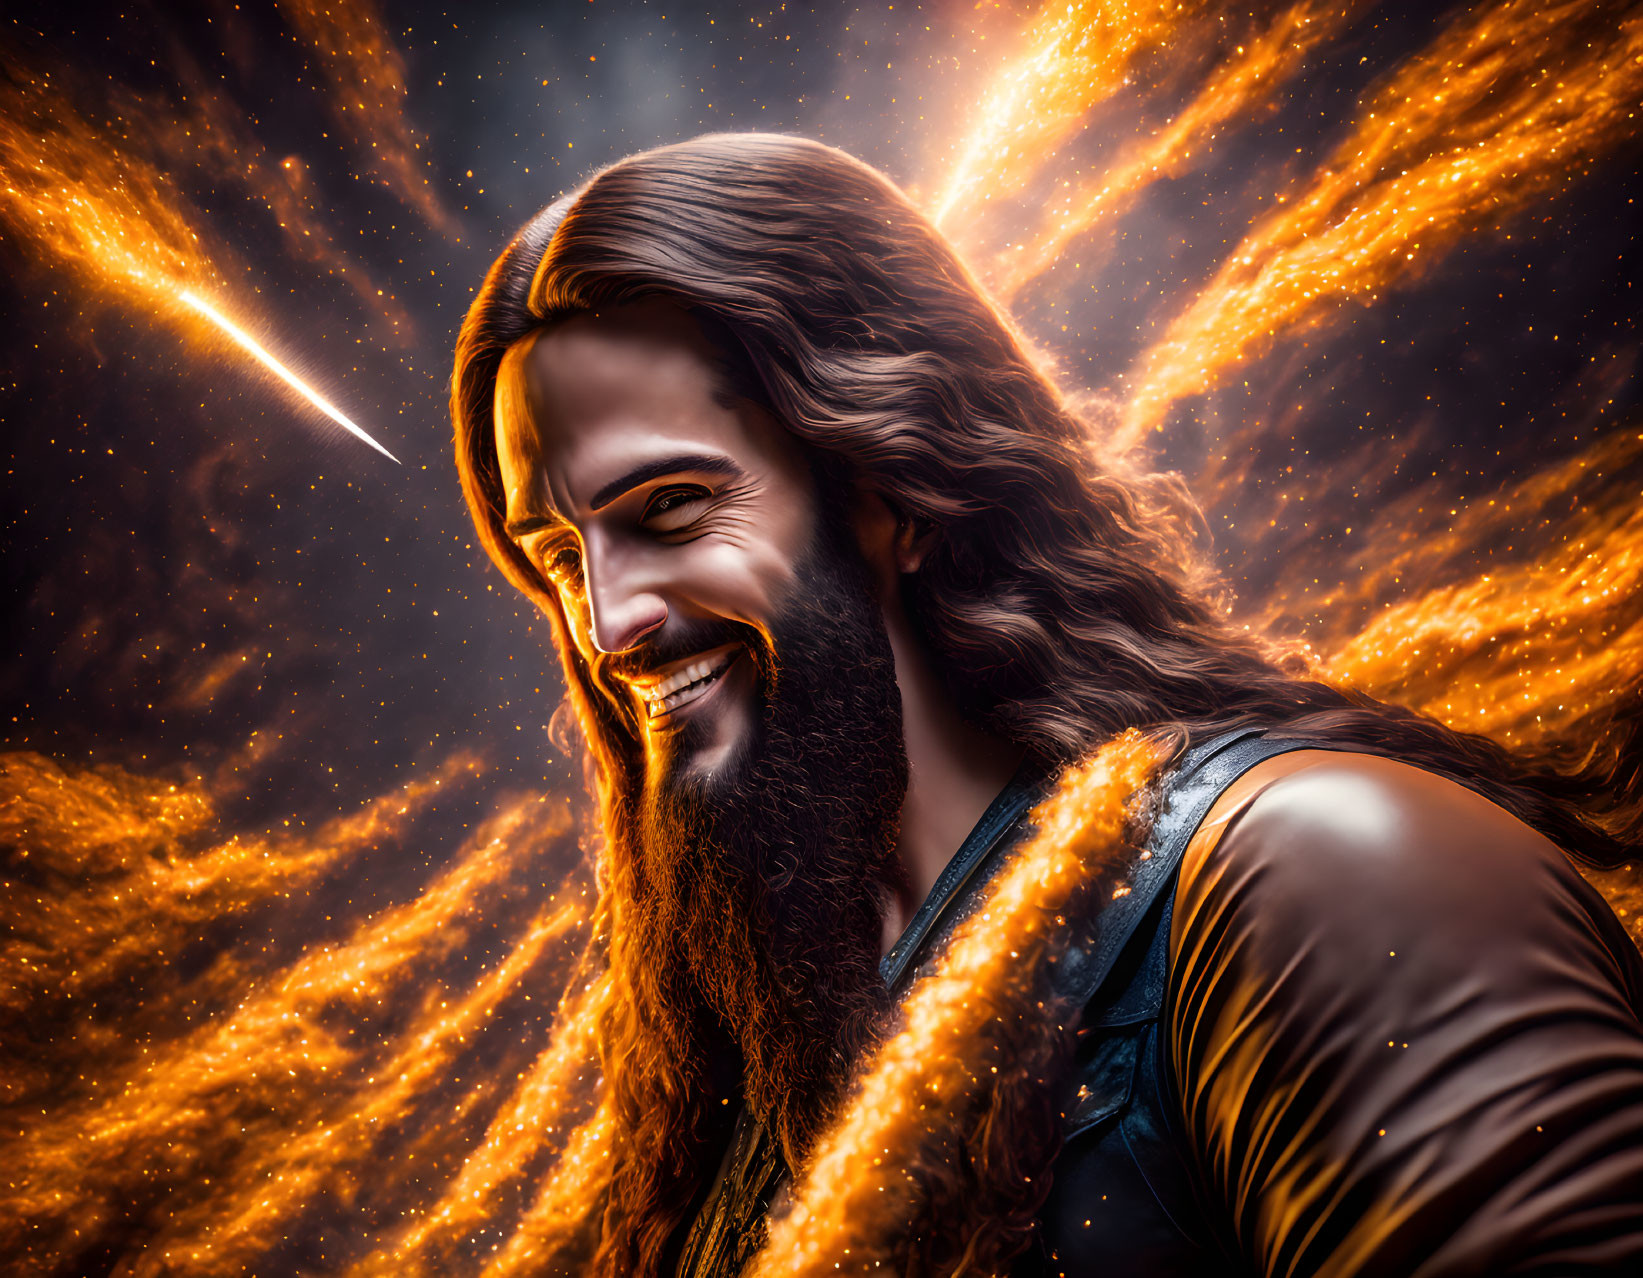 Stylized portrait of a smiling man with long hair and beard against cosmic backdrop